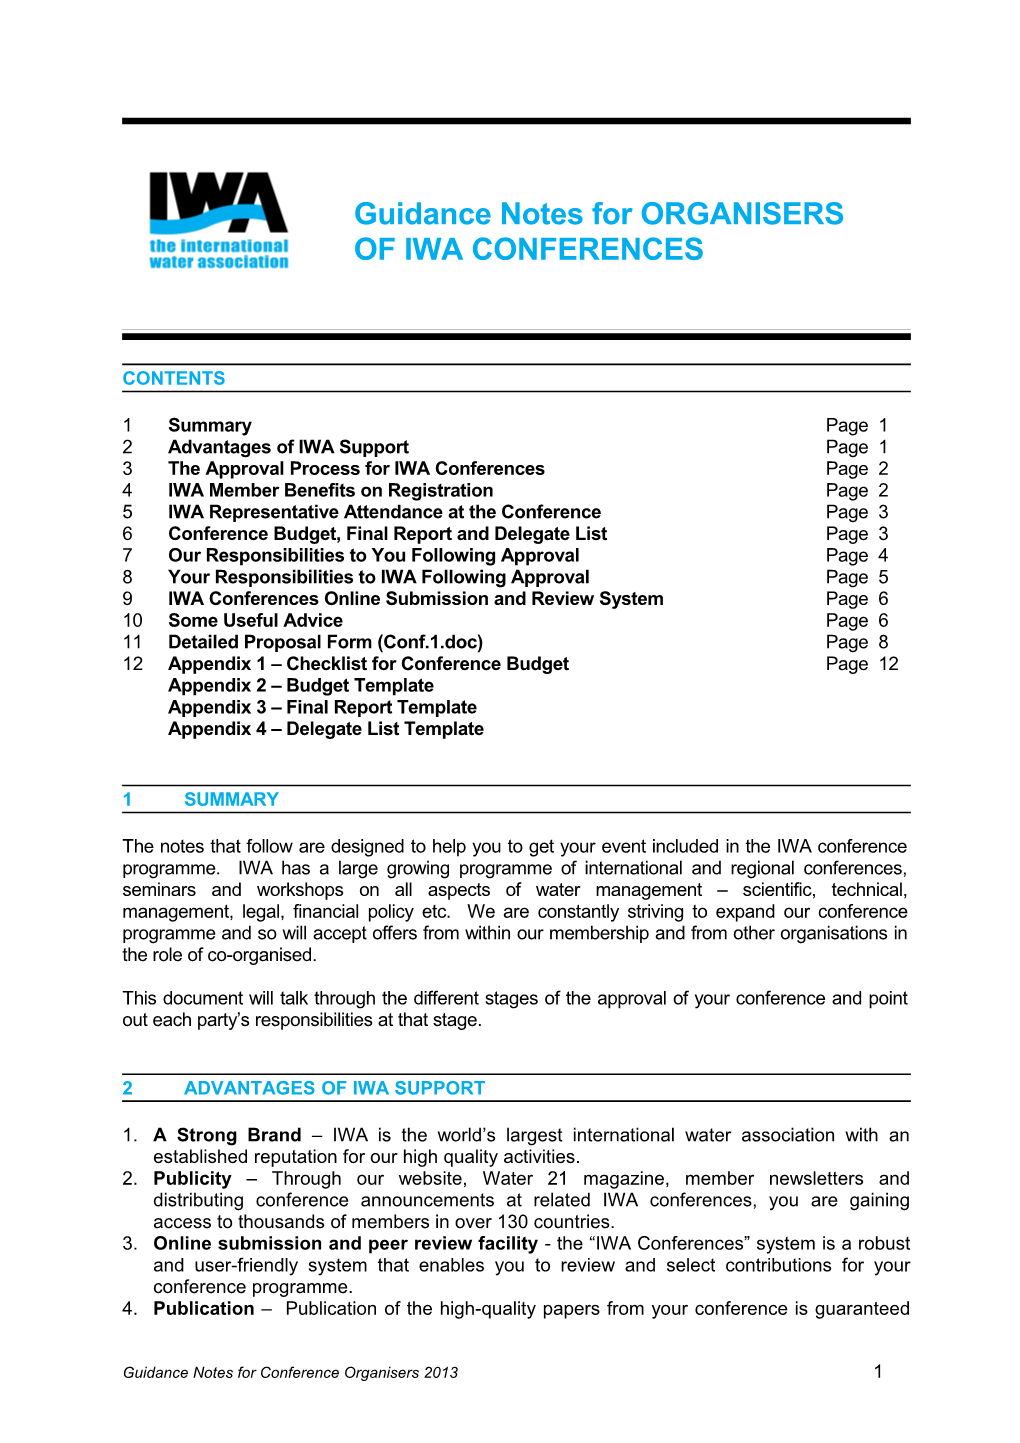 Guidance Notes for ORGANISERS of IWA SPONSORED CONFERENCES